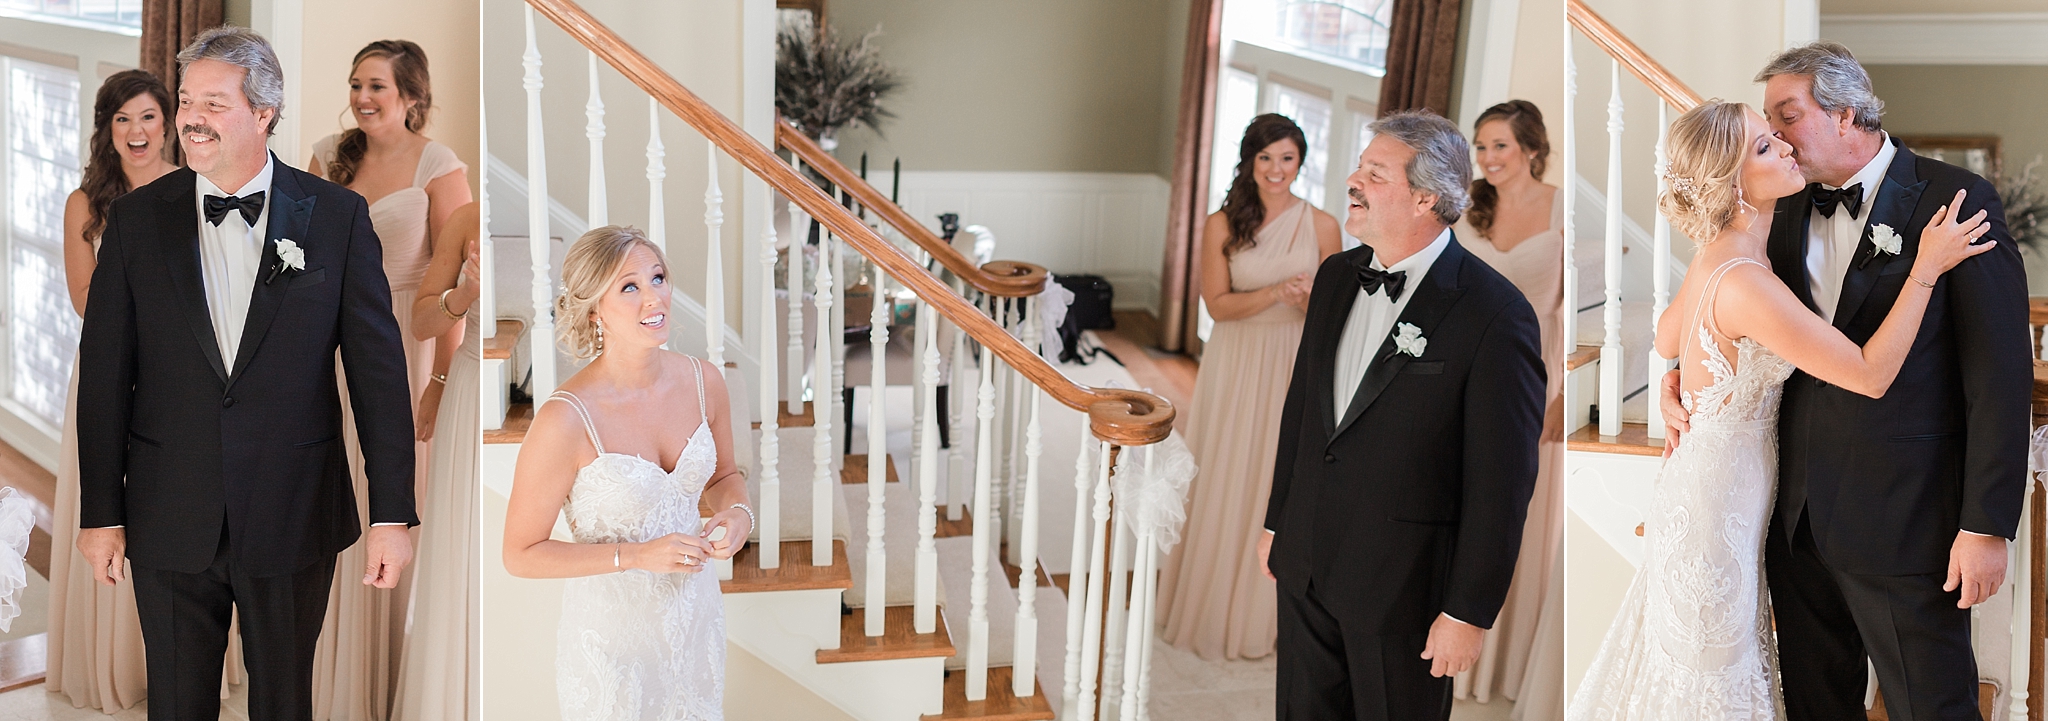 Most brides are familiar with the idea of a "First Look", but this Washington, DC wedding photographer shares information about the other kind of first look.